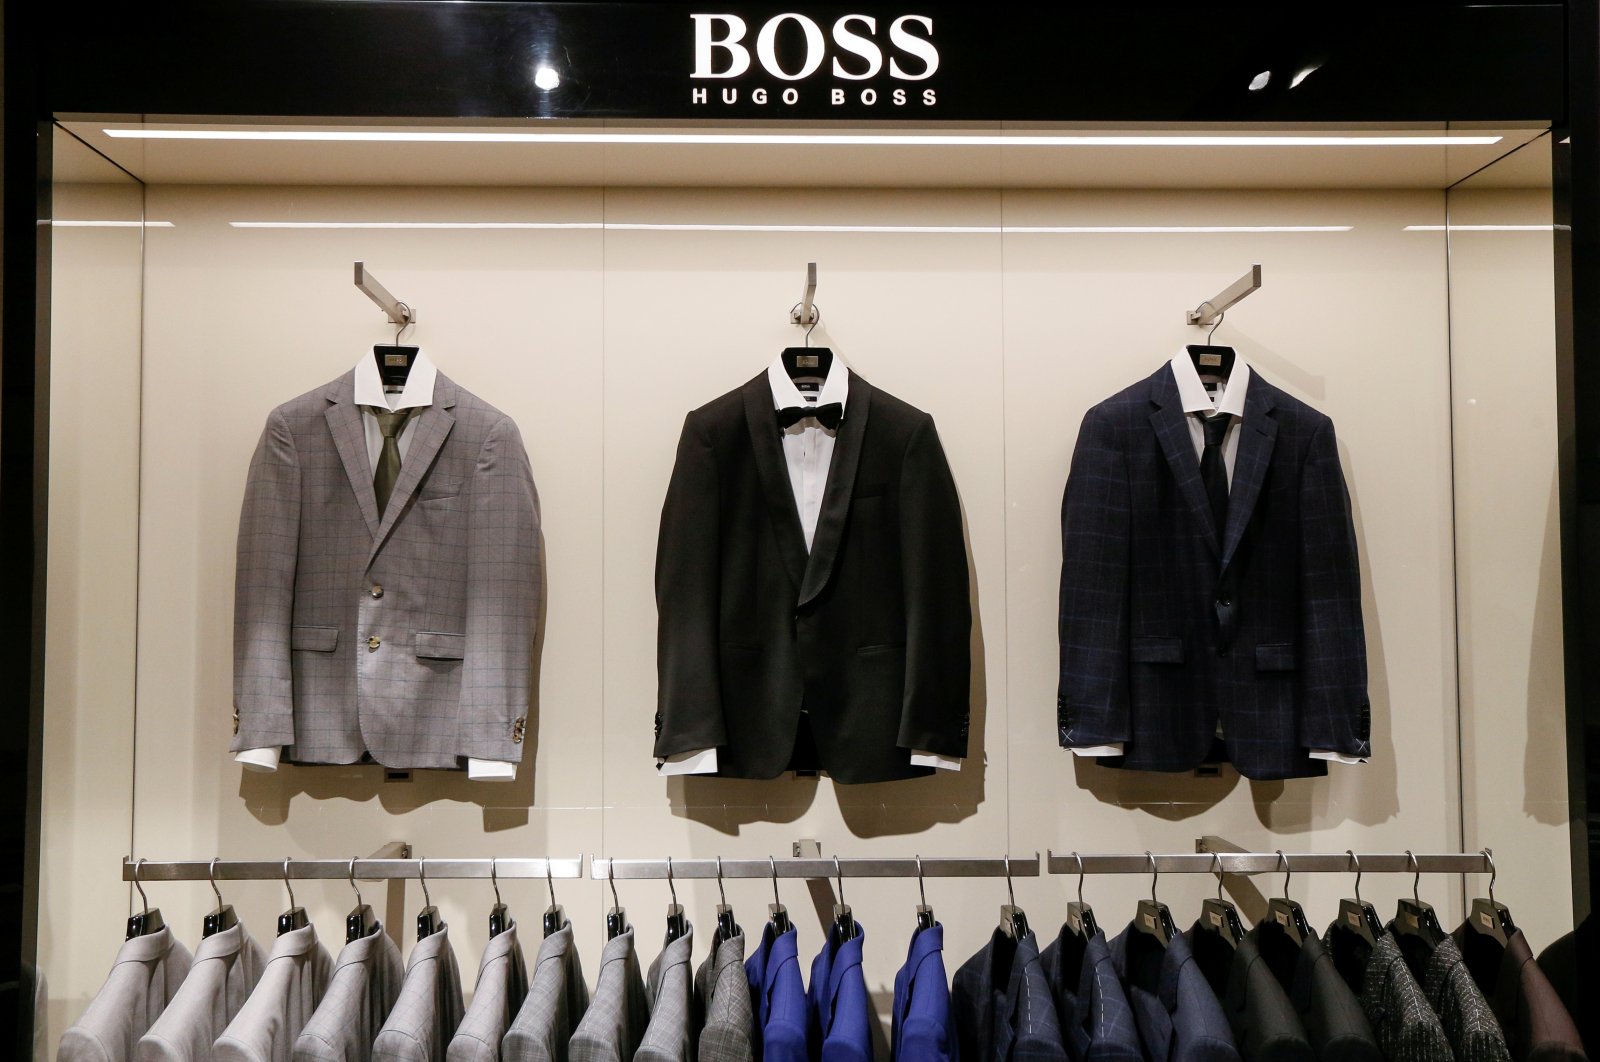 Jackets on display in the Hugo Boss section in the Central Universal Department Store (TsUM) in Kiev, Ukraine, May 17, 2017. (Reuters Photo)